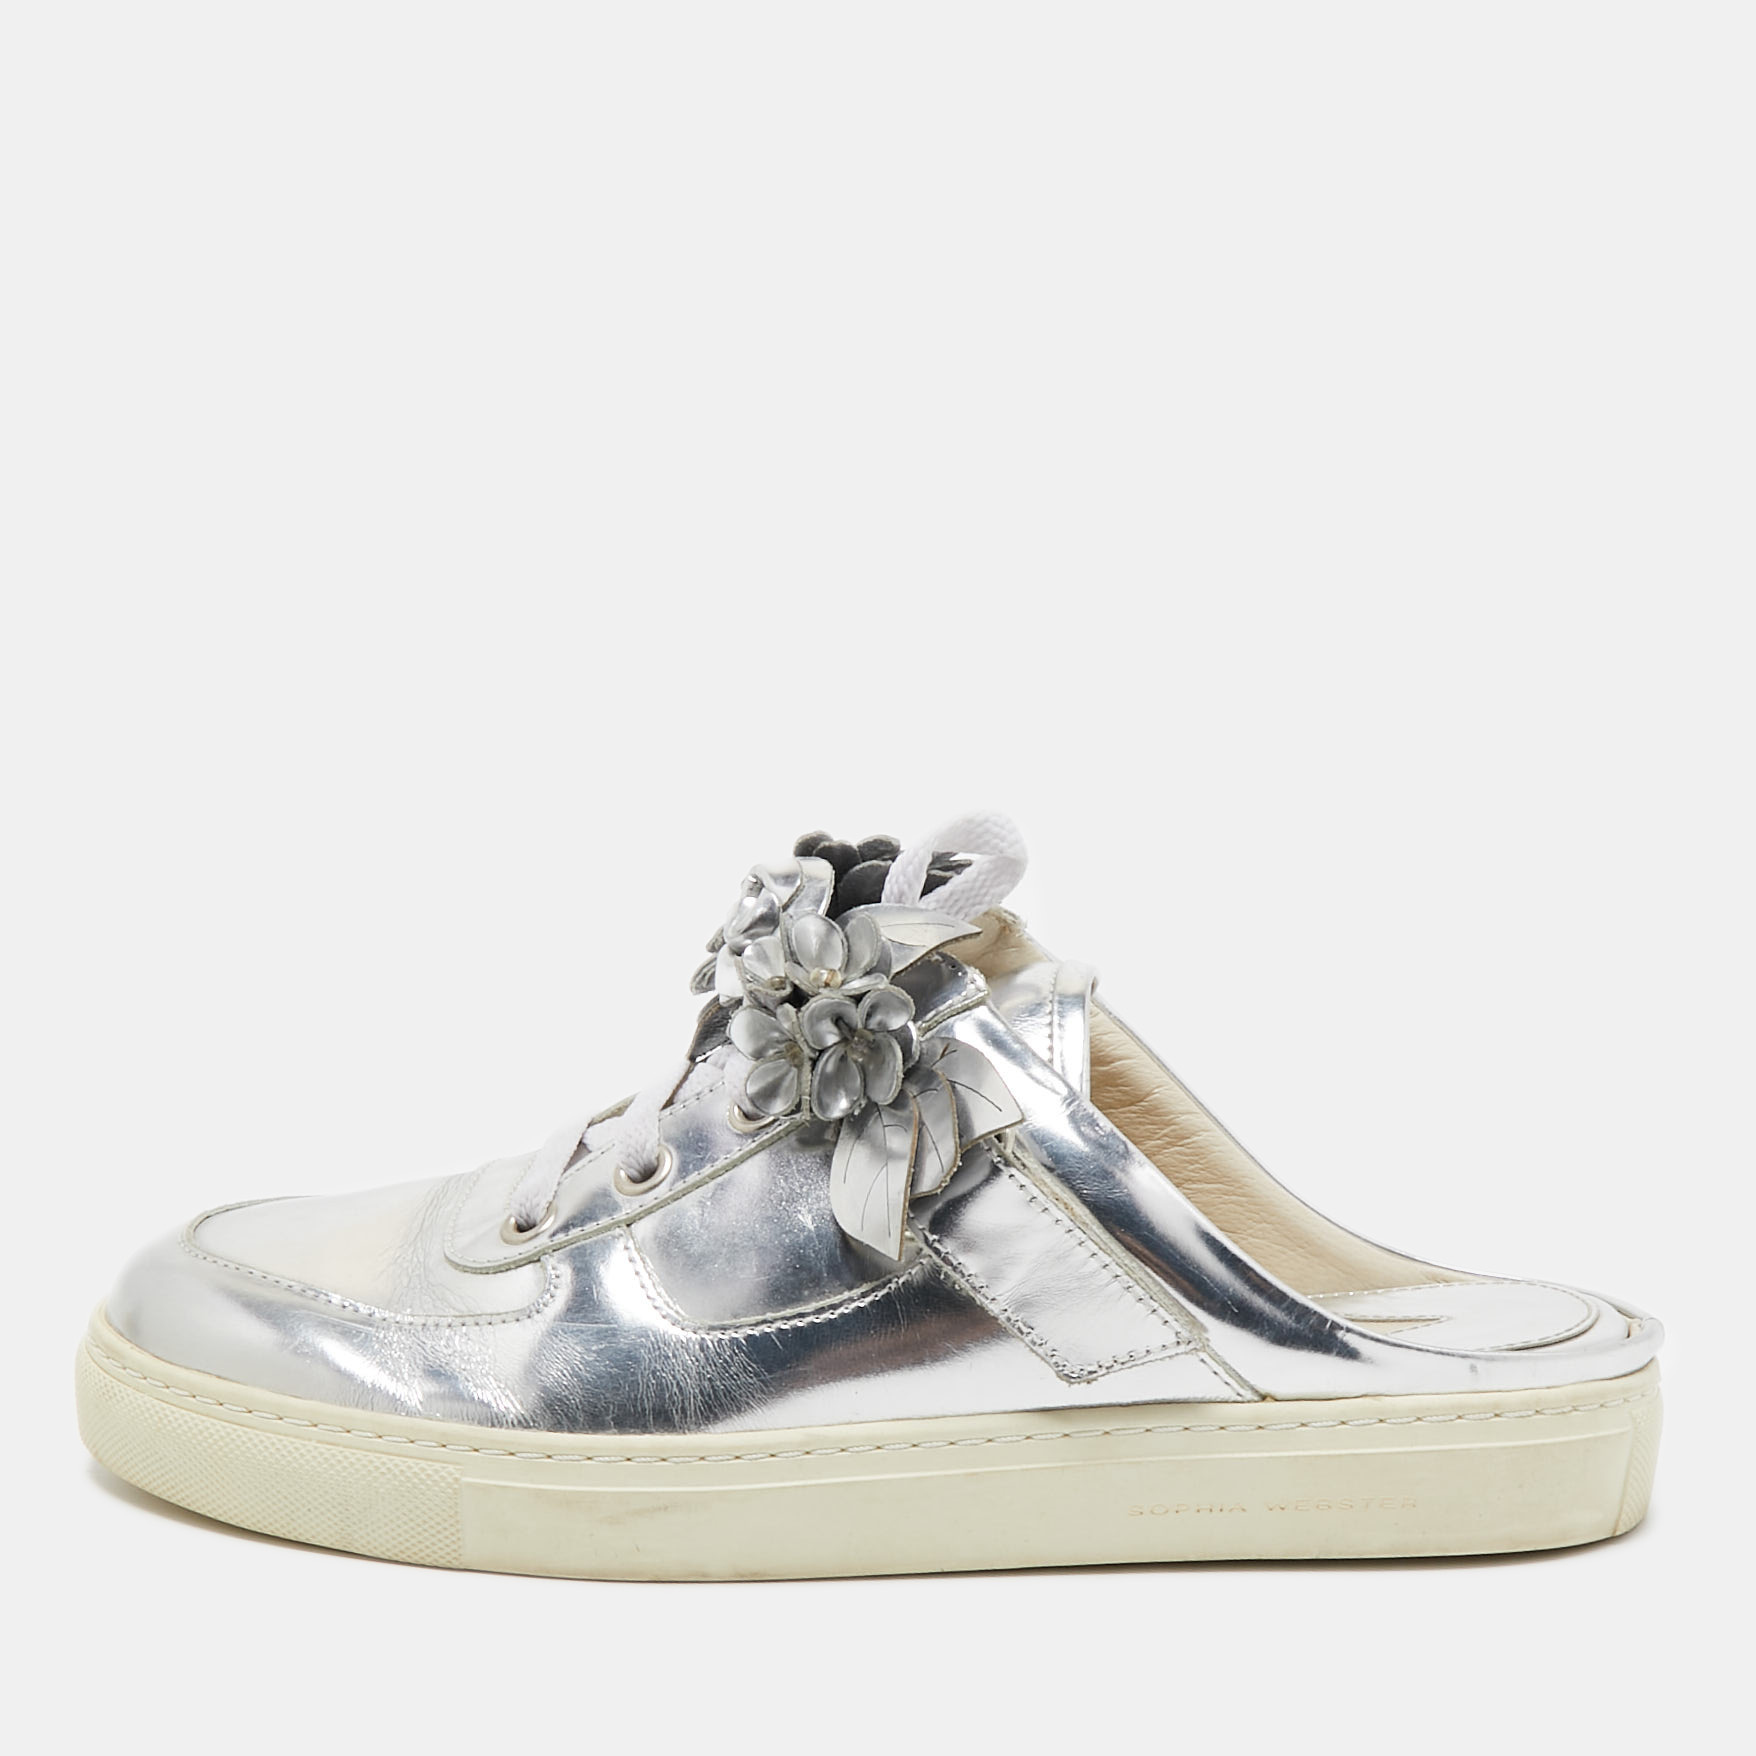 These mules from Sophia Webster are just right on trend They are crafted from metallic silver leather and designed in a slip on sneaker style with laces and flower appliques on the uppers. This eye catching pair is sure to have everyone in admiration.